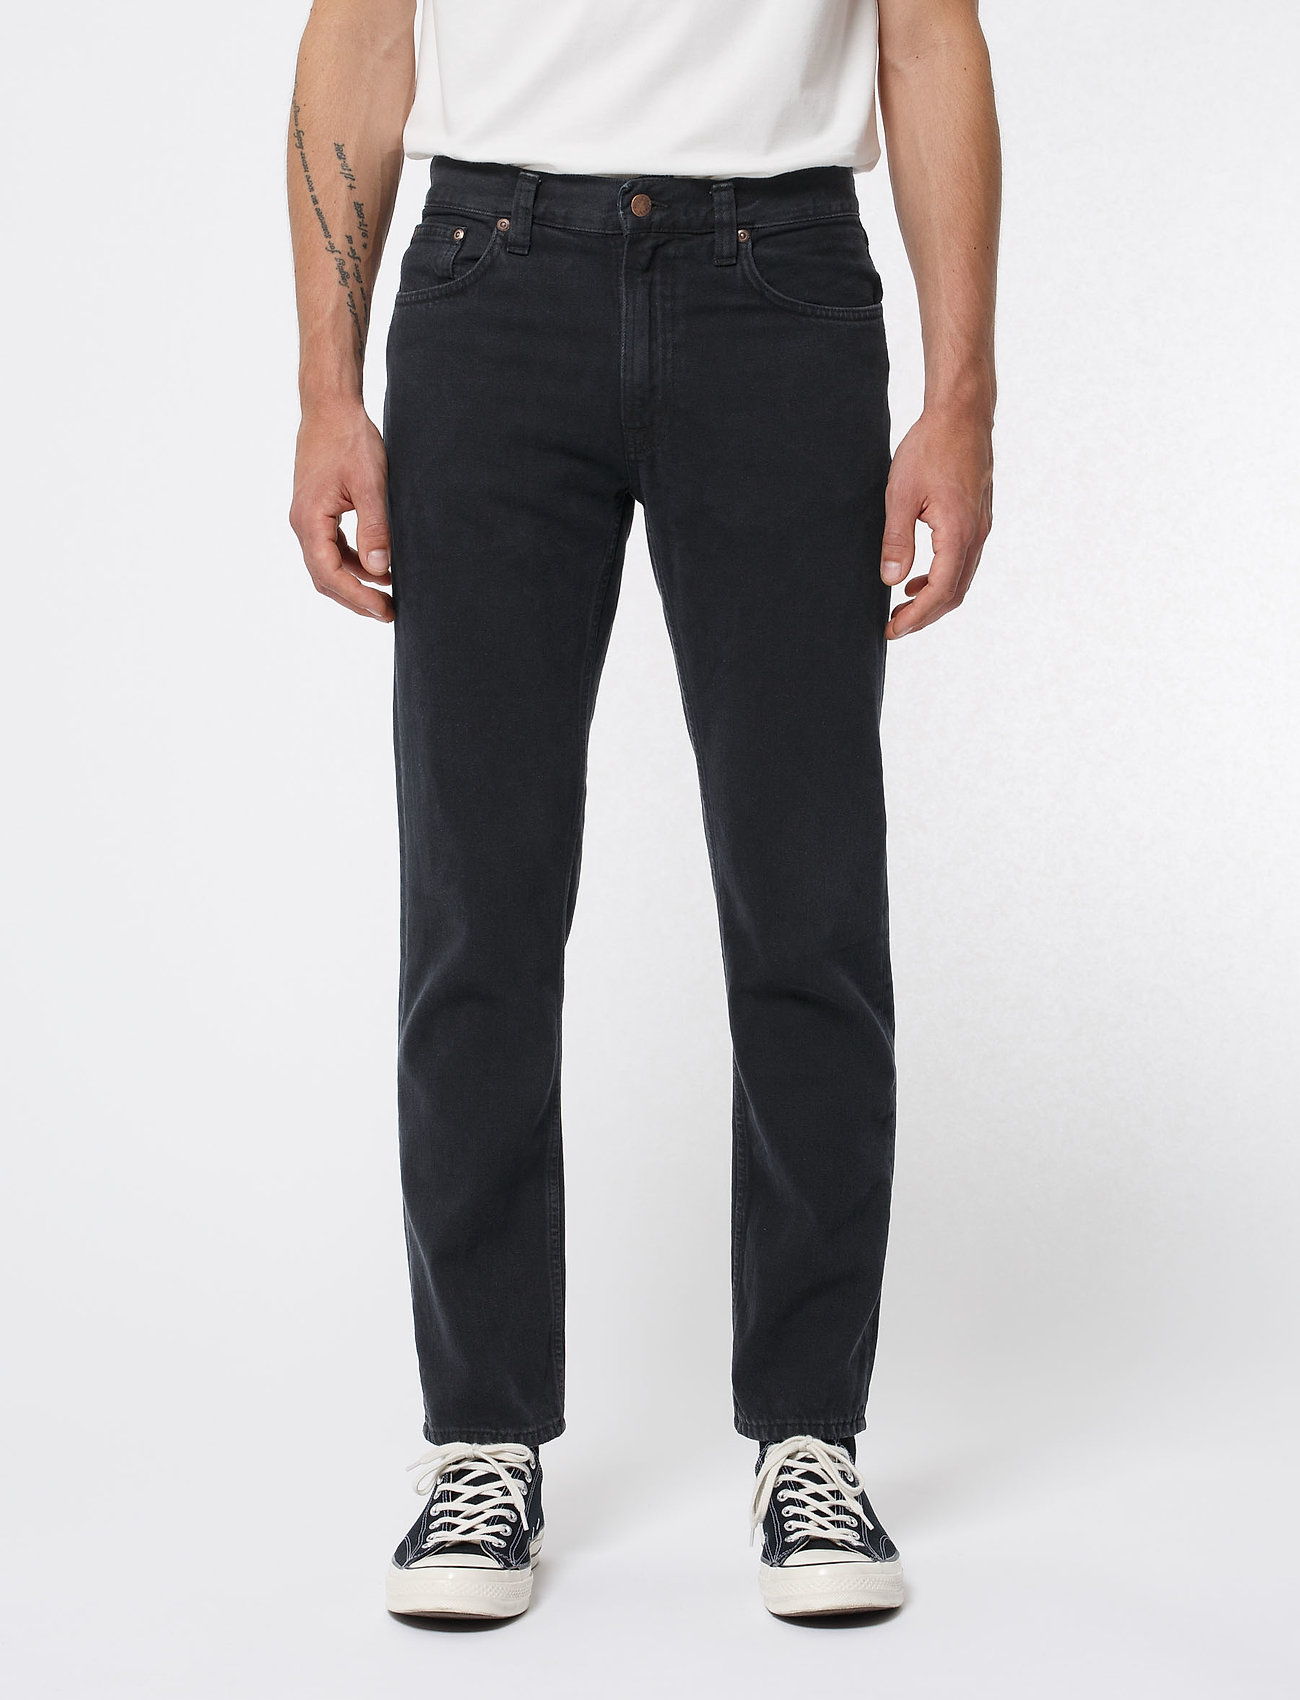 Nudie Jeans - Gritty Jackson - regular jeans - black forest - 0